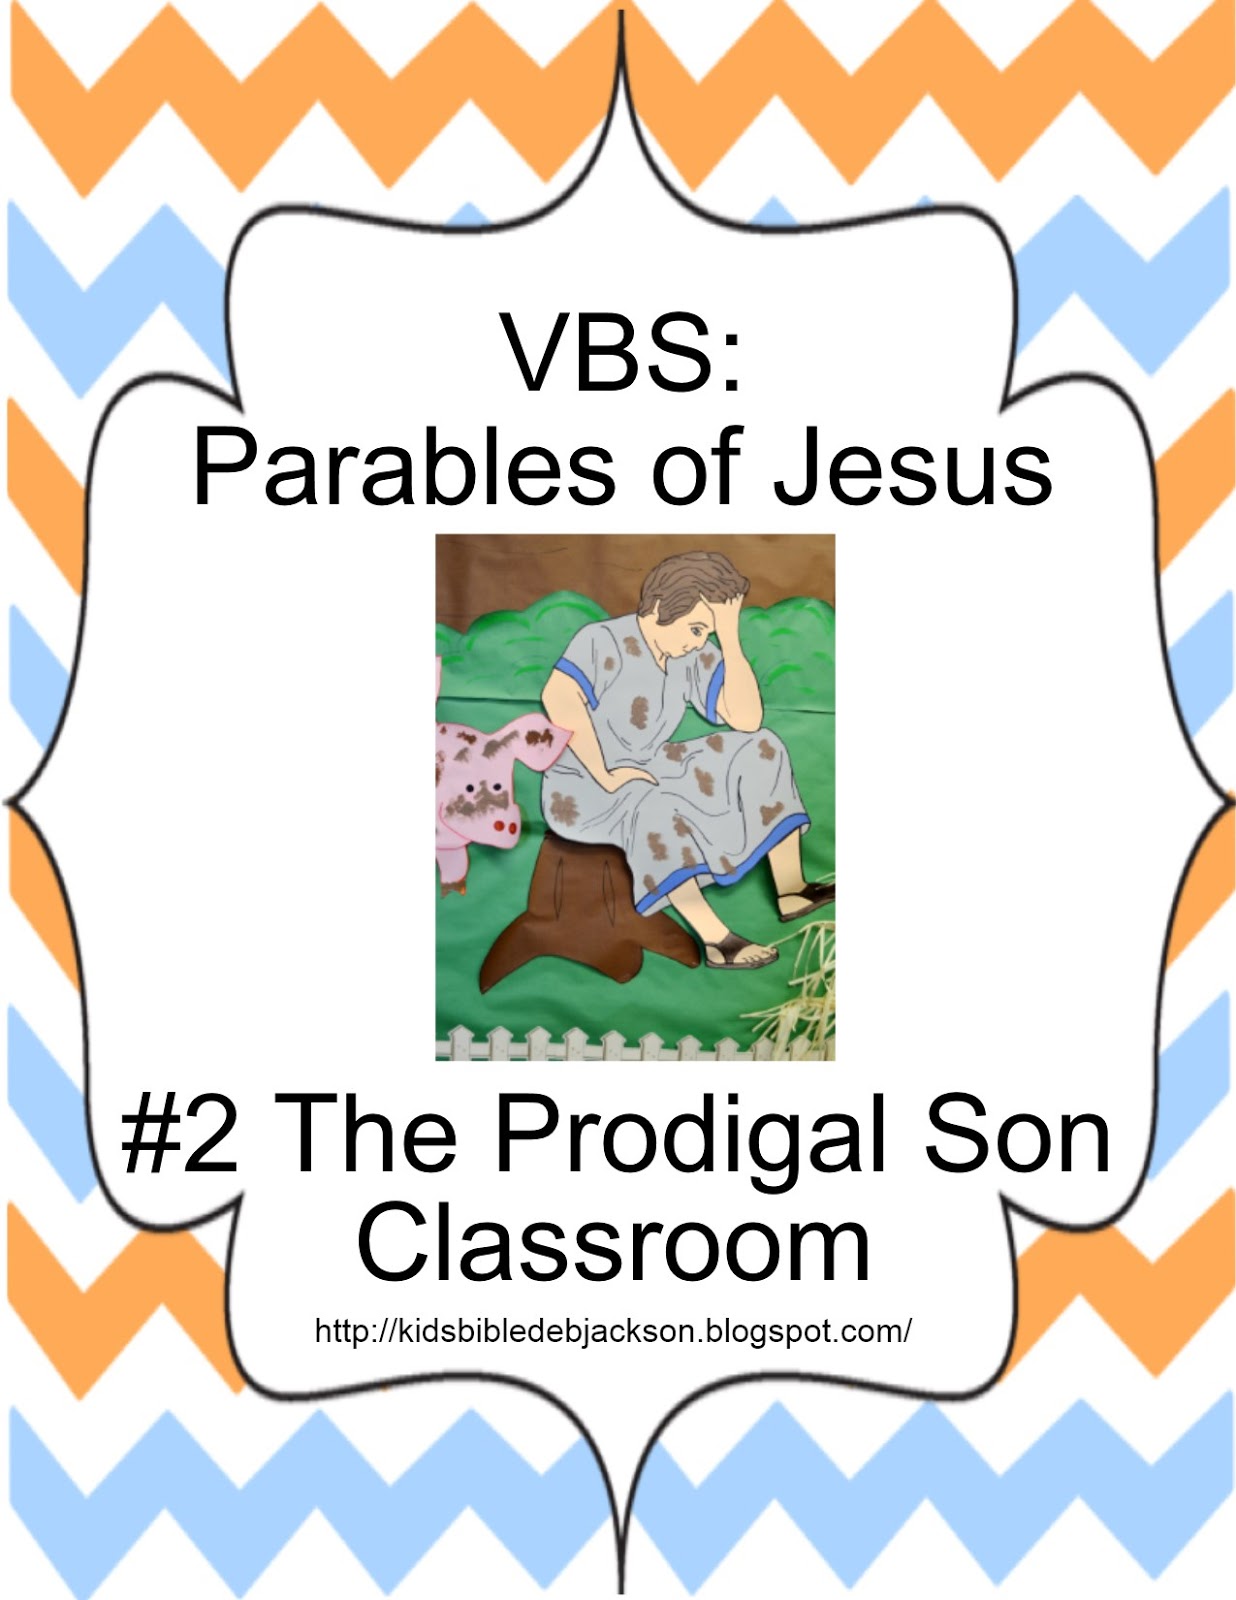 http://kidsbibledebjackson.blogspot.com/2014/06/parables-of-jesus-vbs-day-3the-lost.html